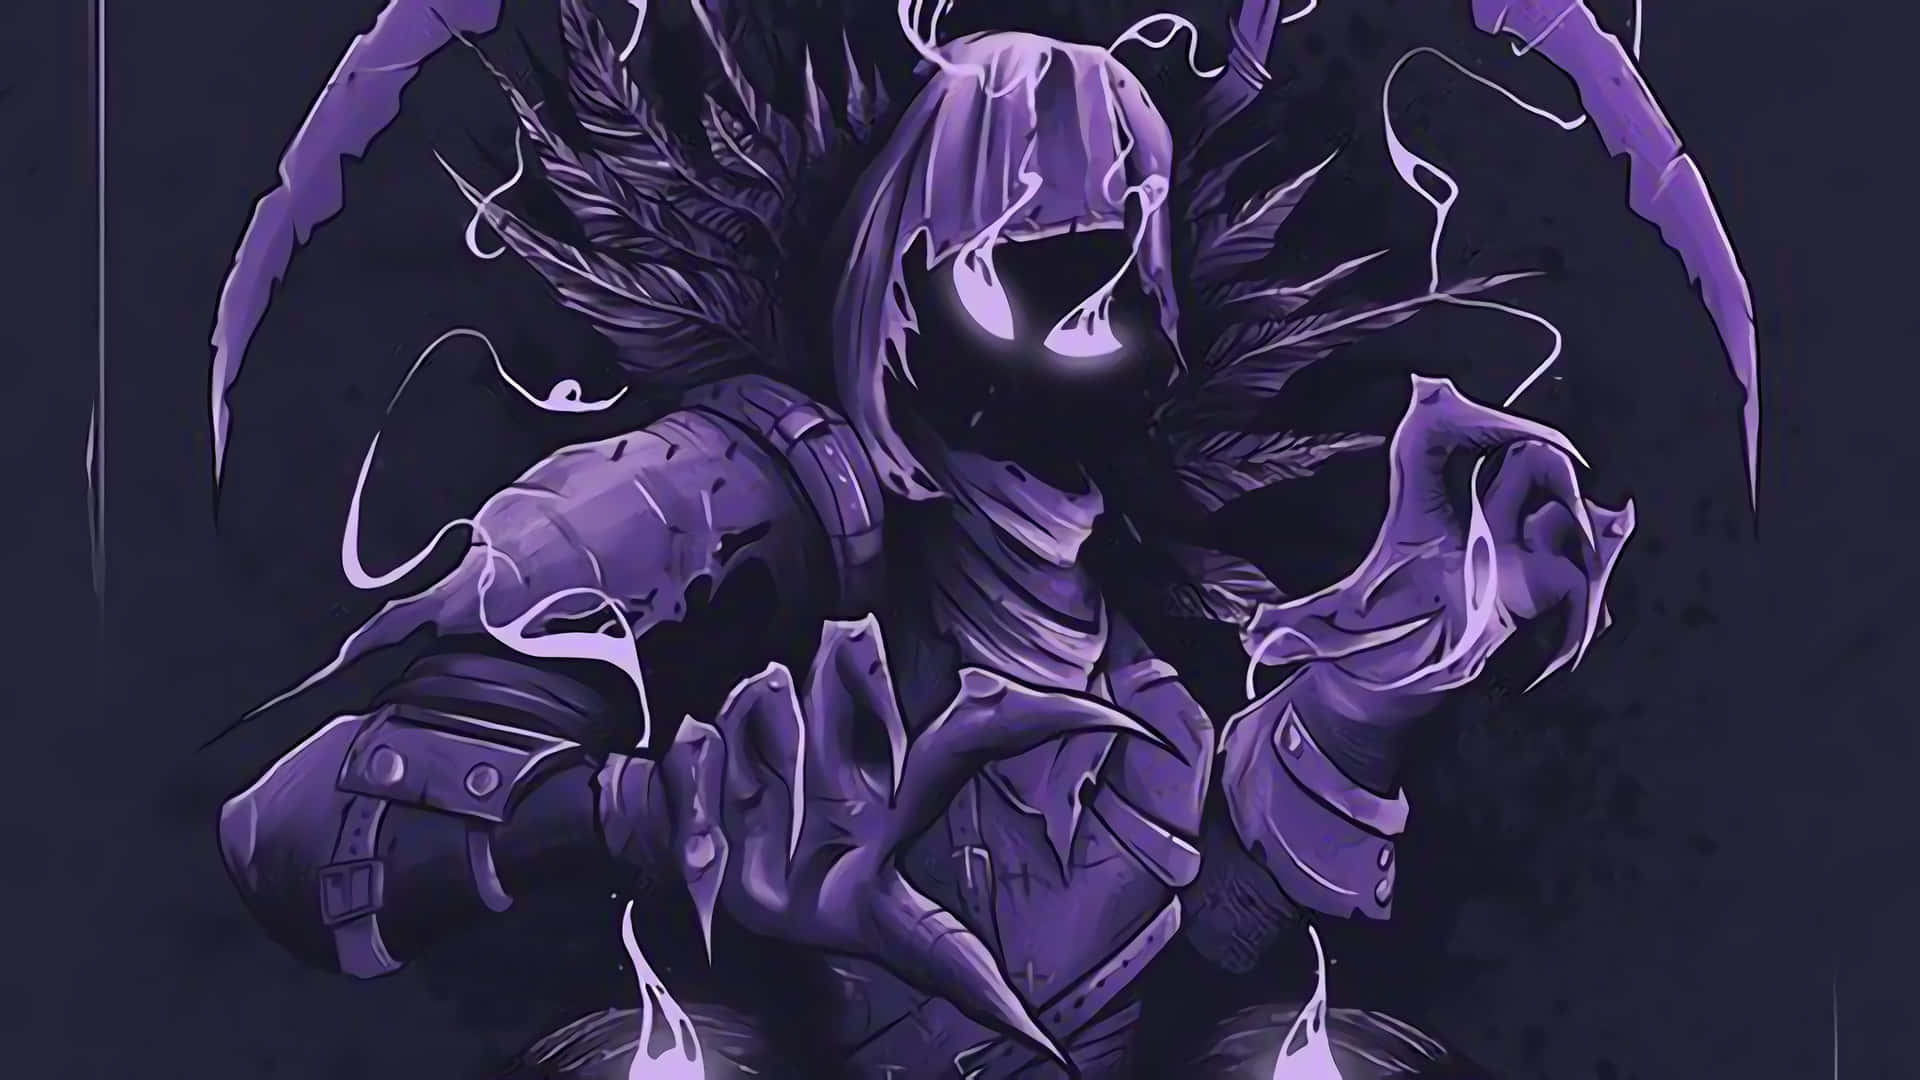 Epic gaming moments with Raven Fortnite Wallpaper